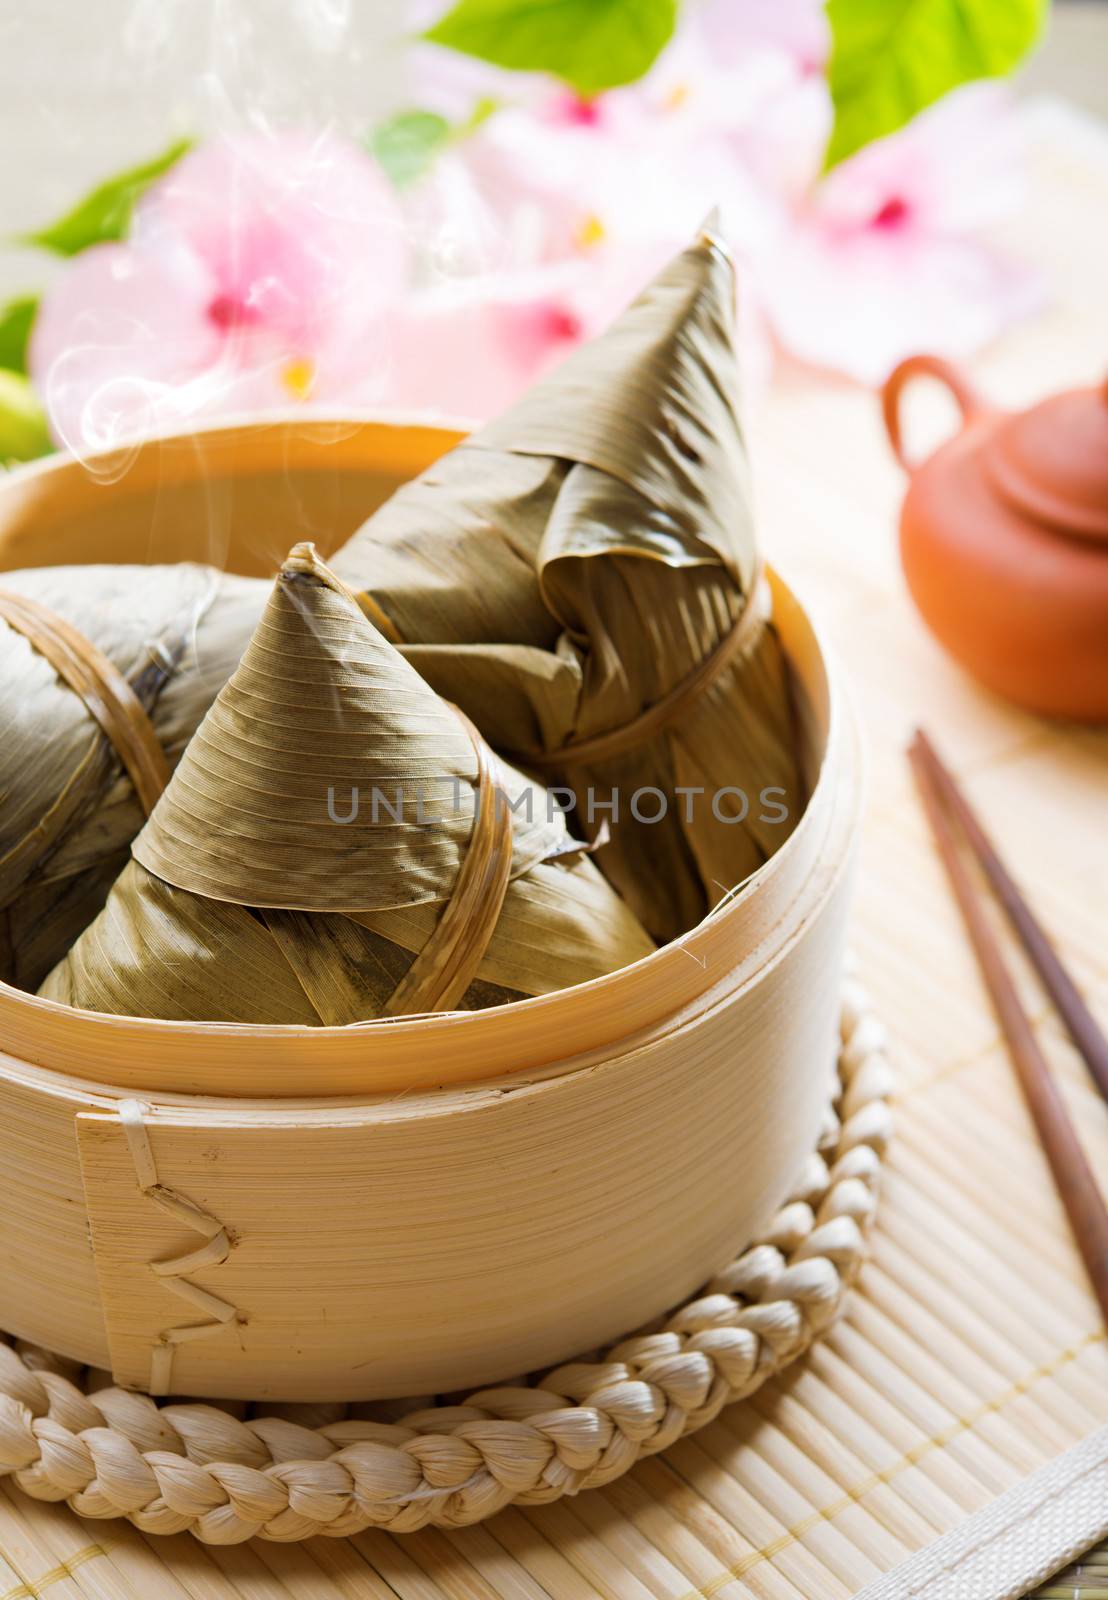 Hot rice dumpling or zongzi. Traditional steamed sticky  glutinous rice dumplings. Chinese food dim sum. Asian cuisine.